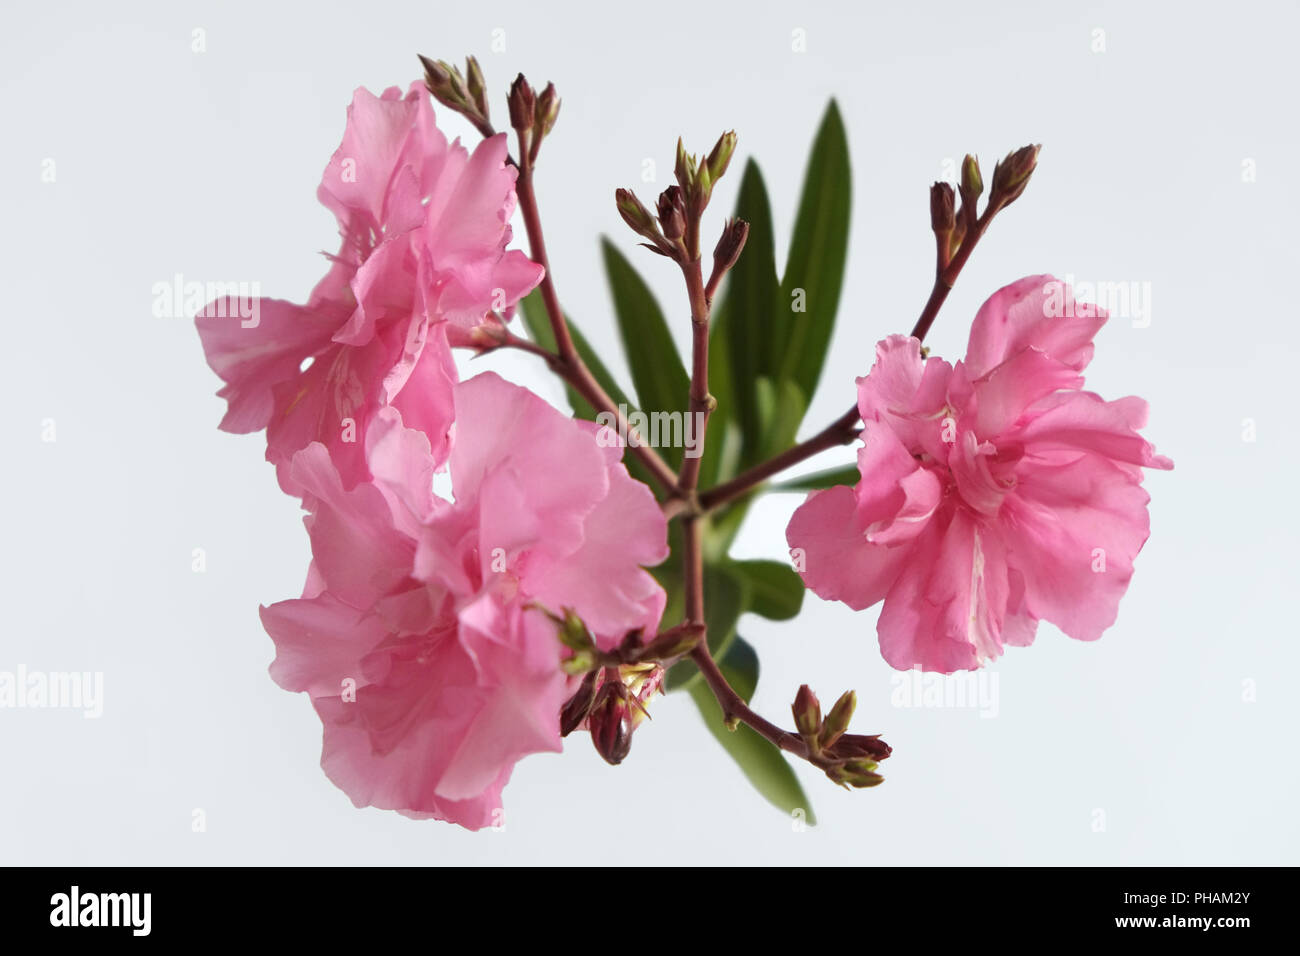 Oleander blossoms Stock Photo